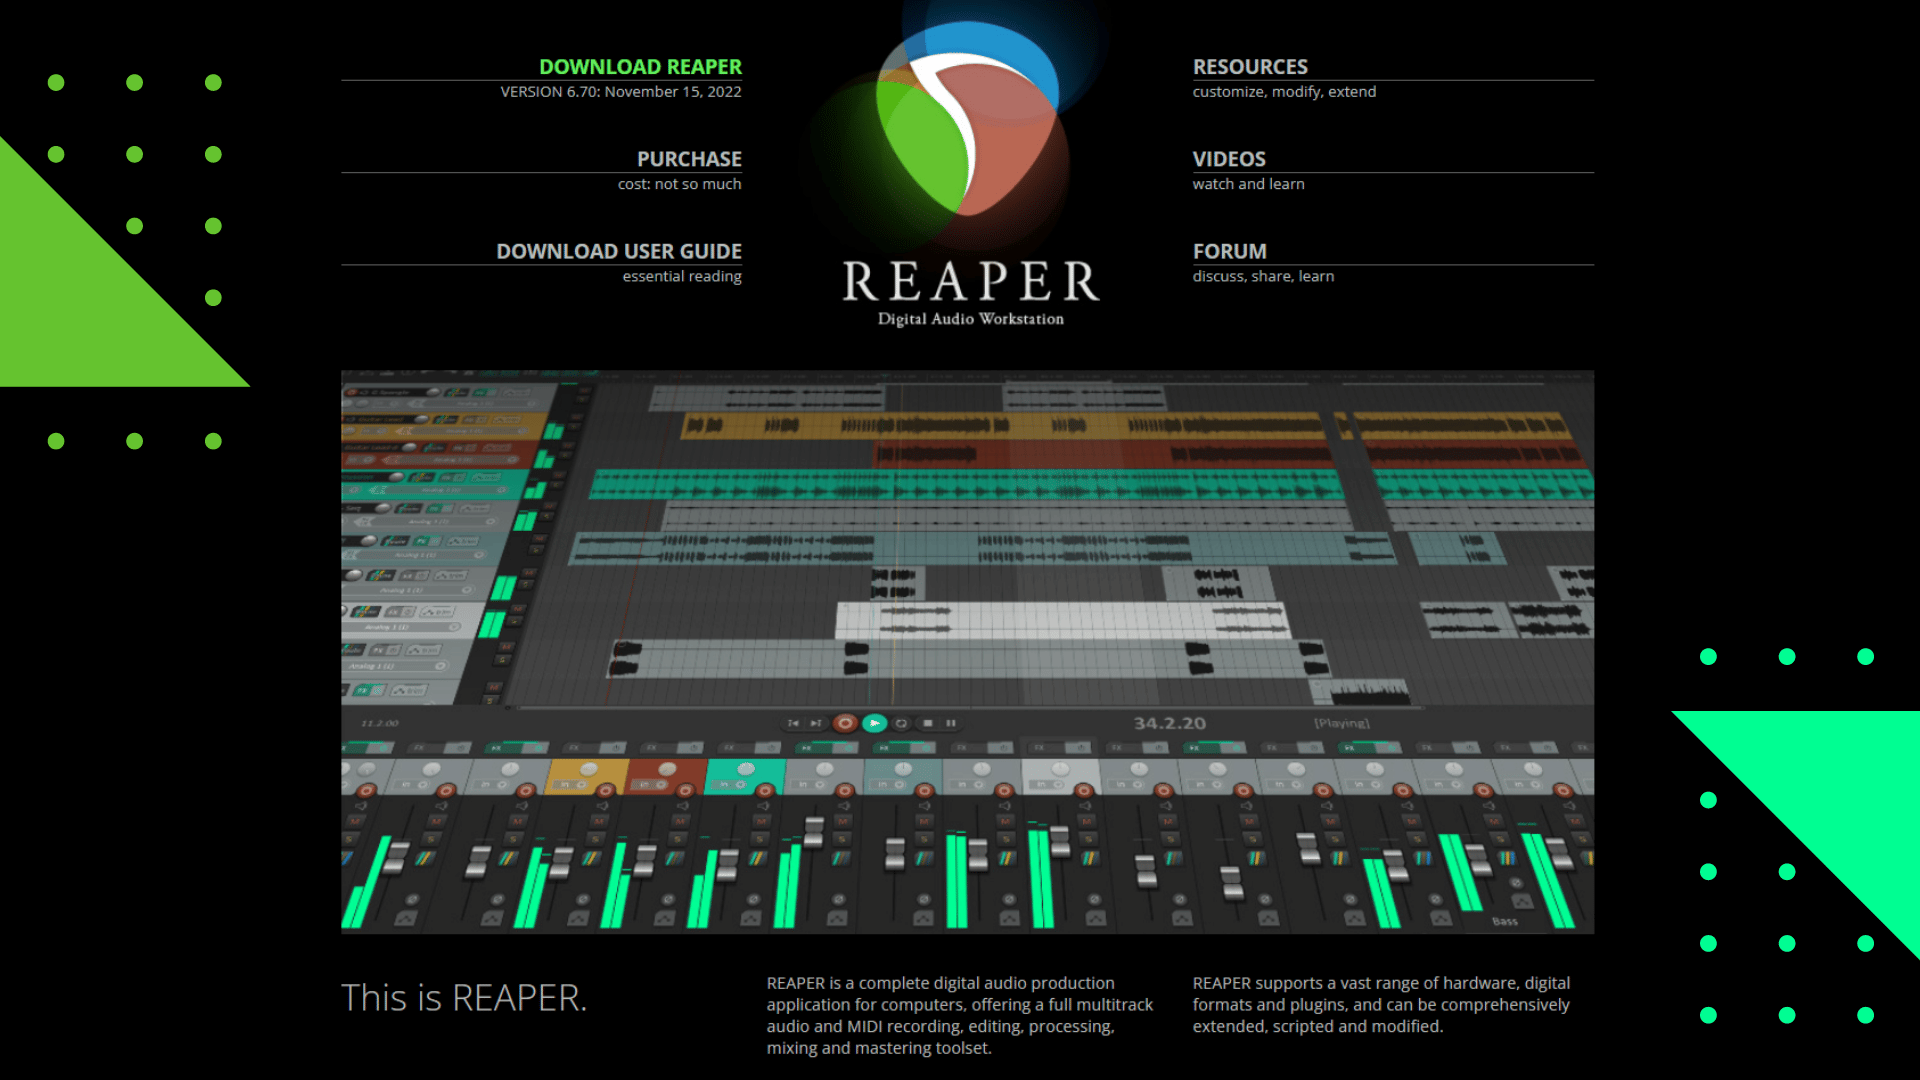 Reaper Features